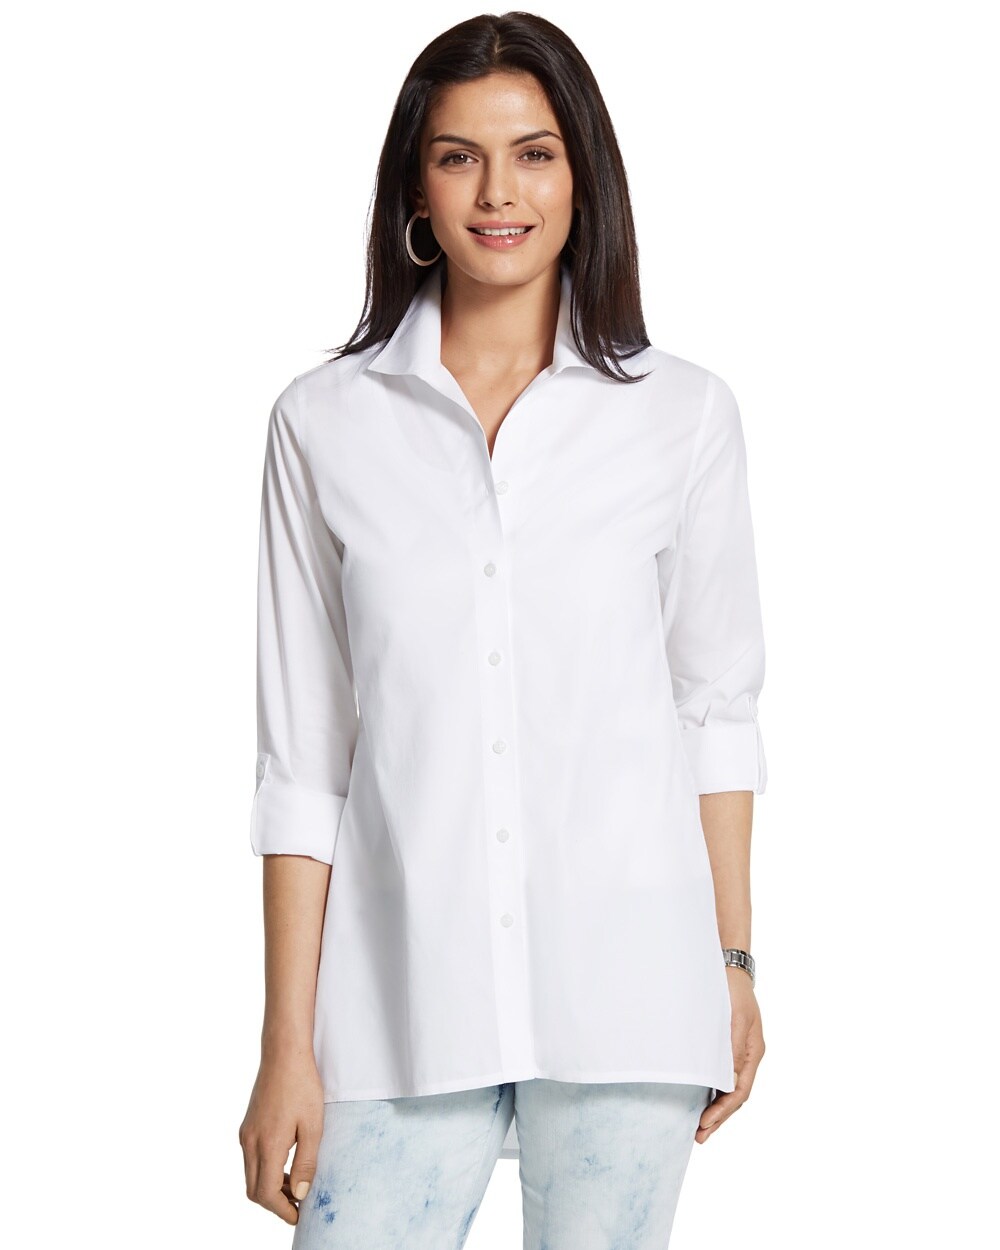 Effortless Roll-Sleeve Cayla Shirt - Women's Tops - New Arrivals - Chico's